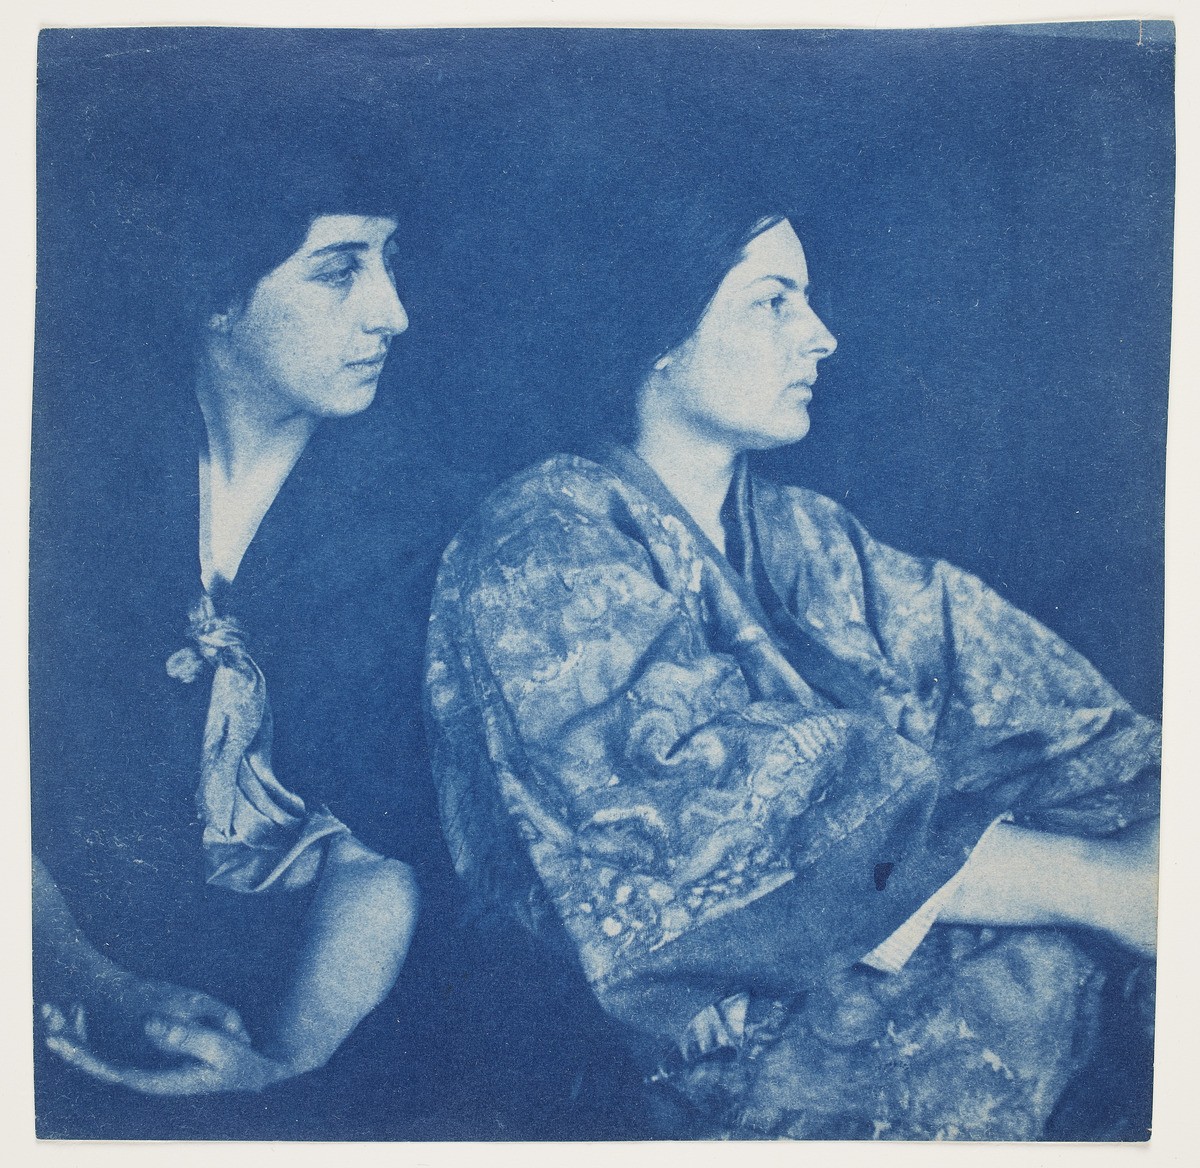 Robert Joseph Flaherty, Portrait of Frances Loring and Florence Wyle